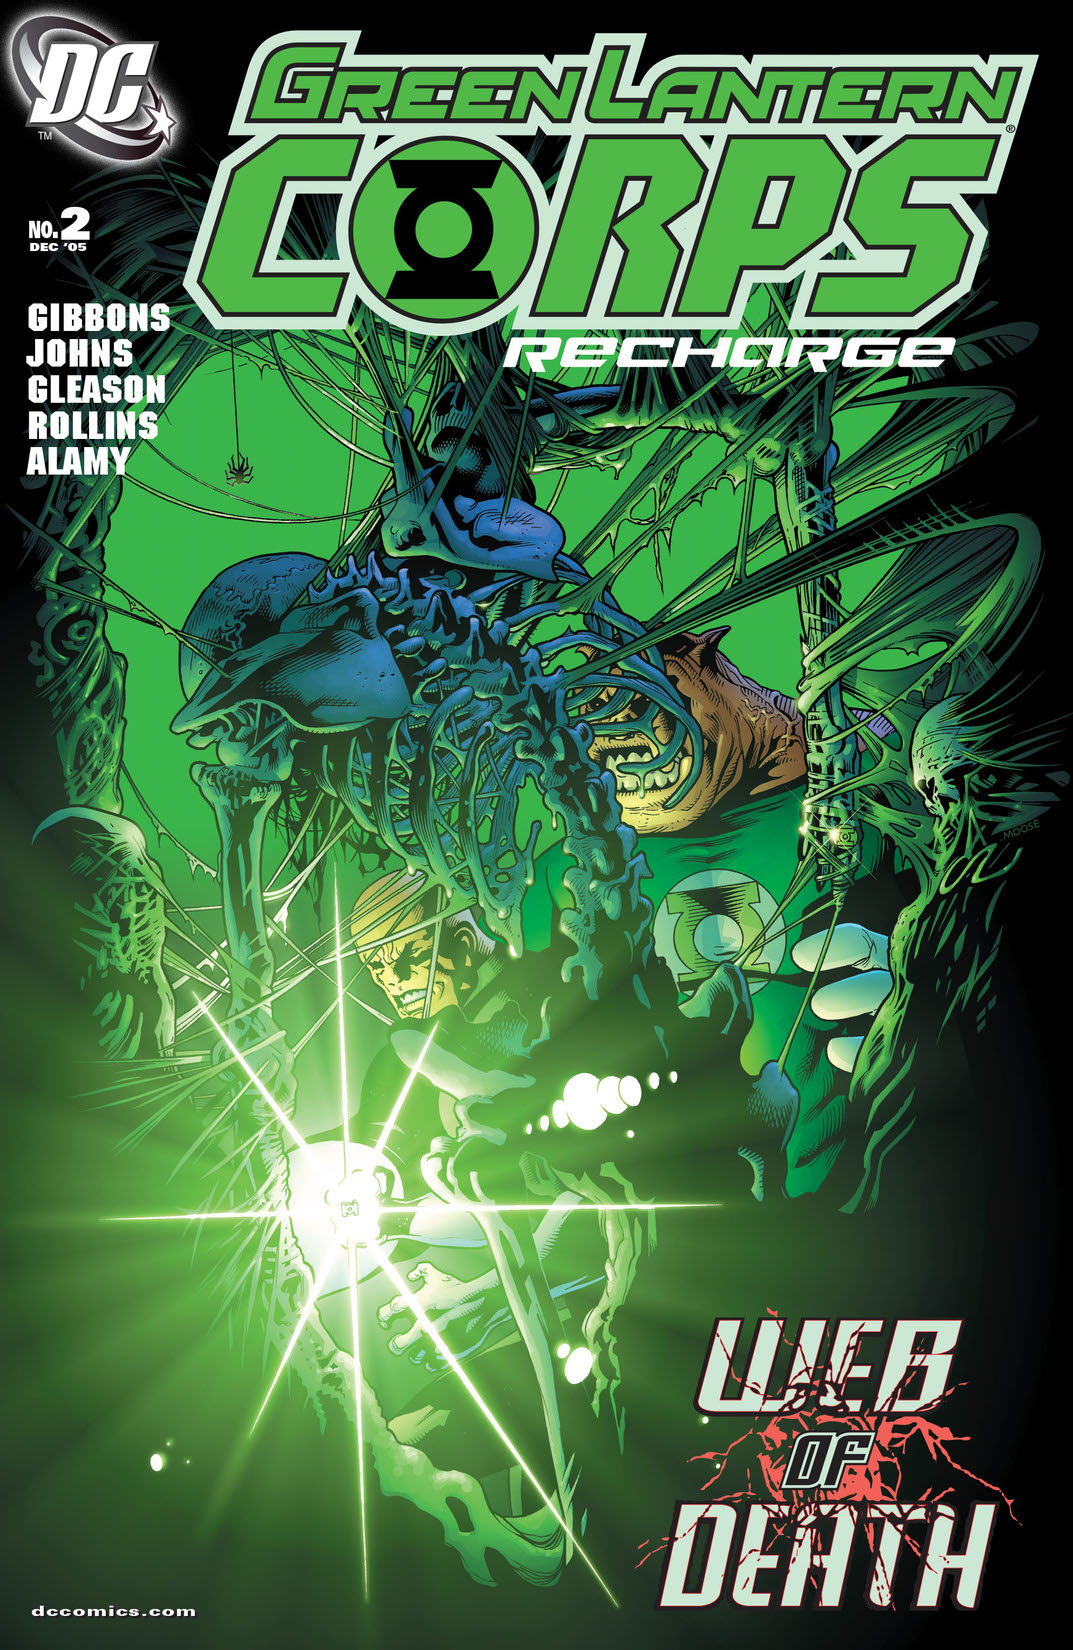 Green Lantern Corps: Recharge #2 preview images